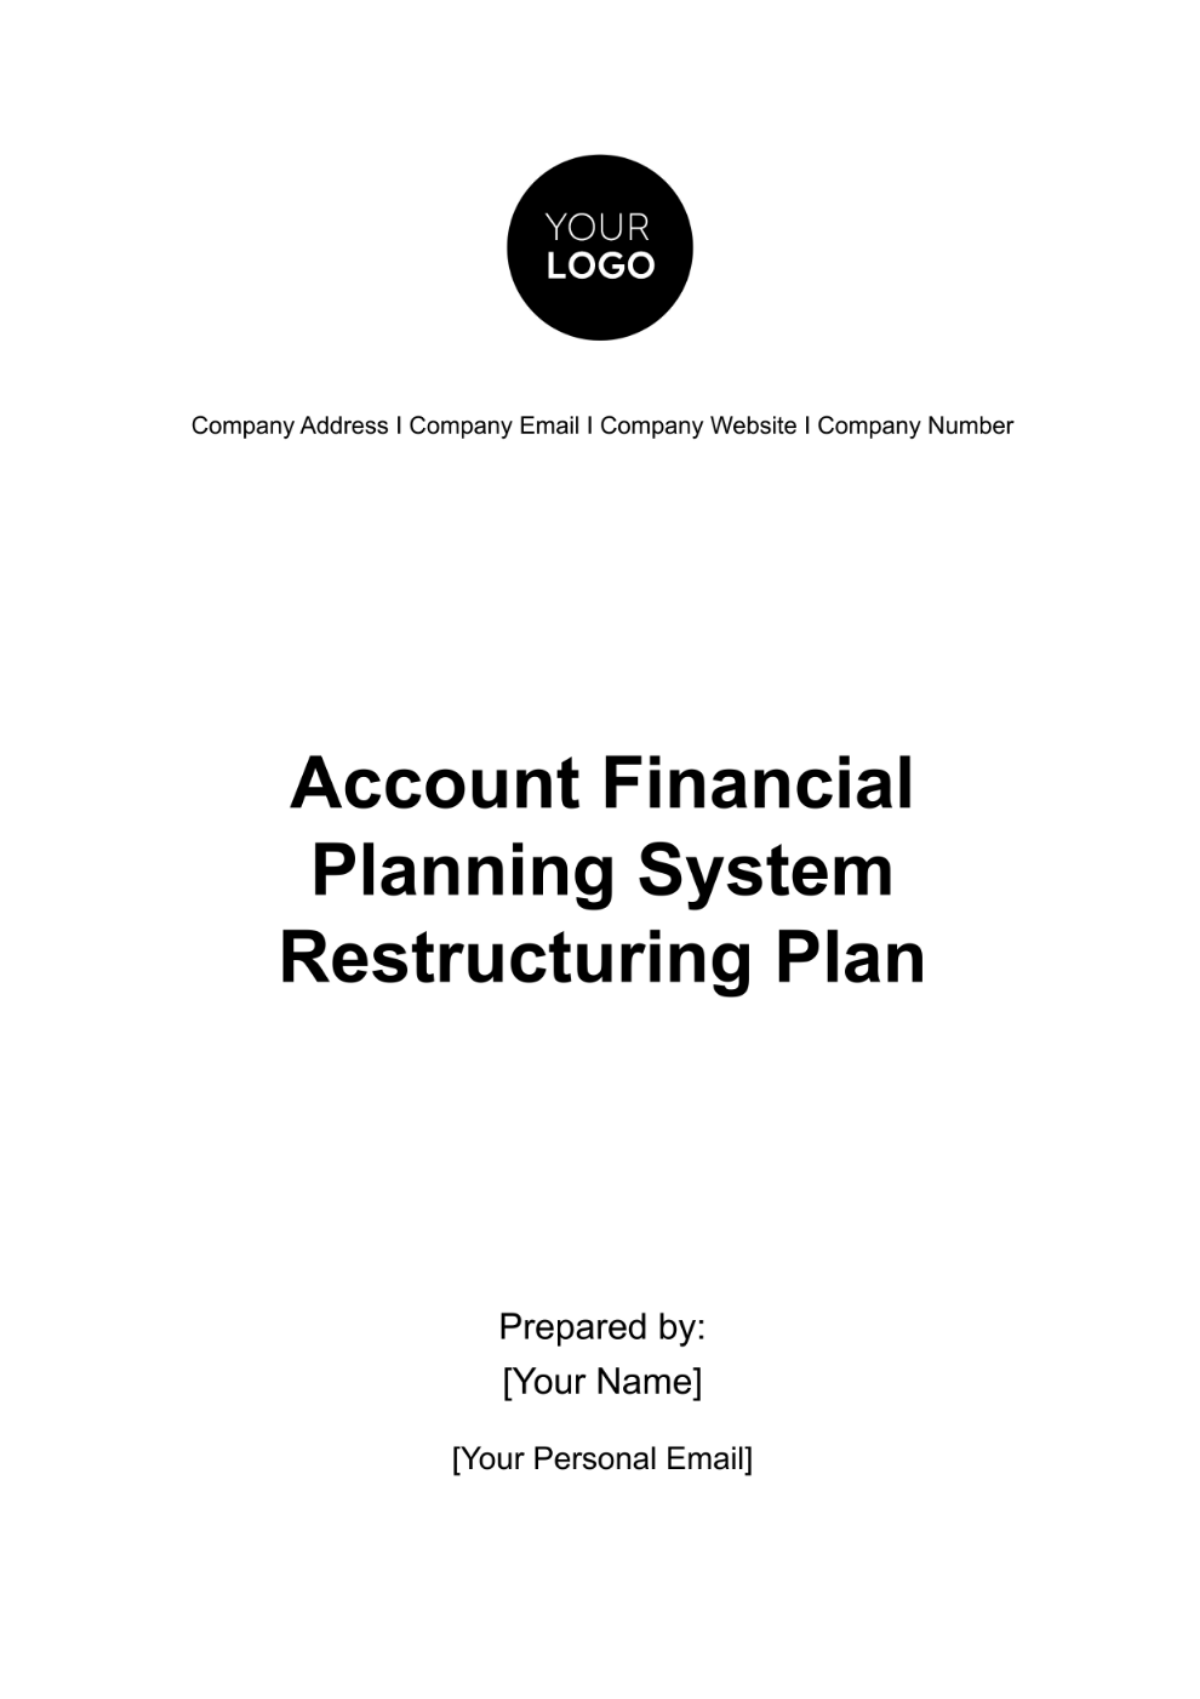 Free Account Financial Planning System Restructuring Plan Template